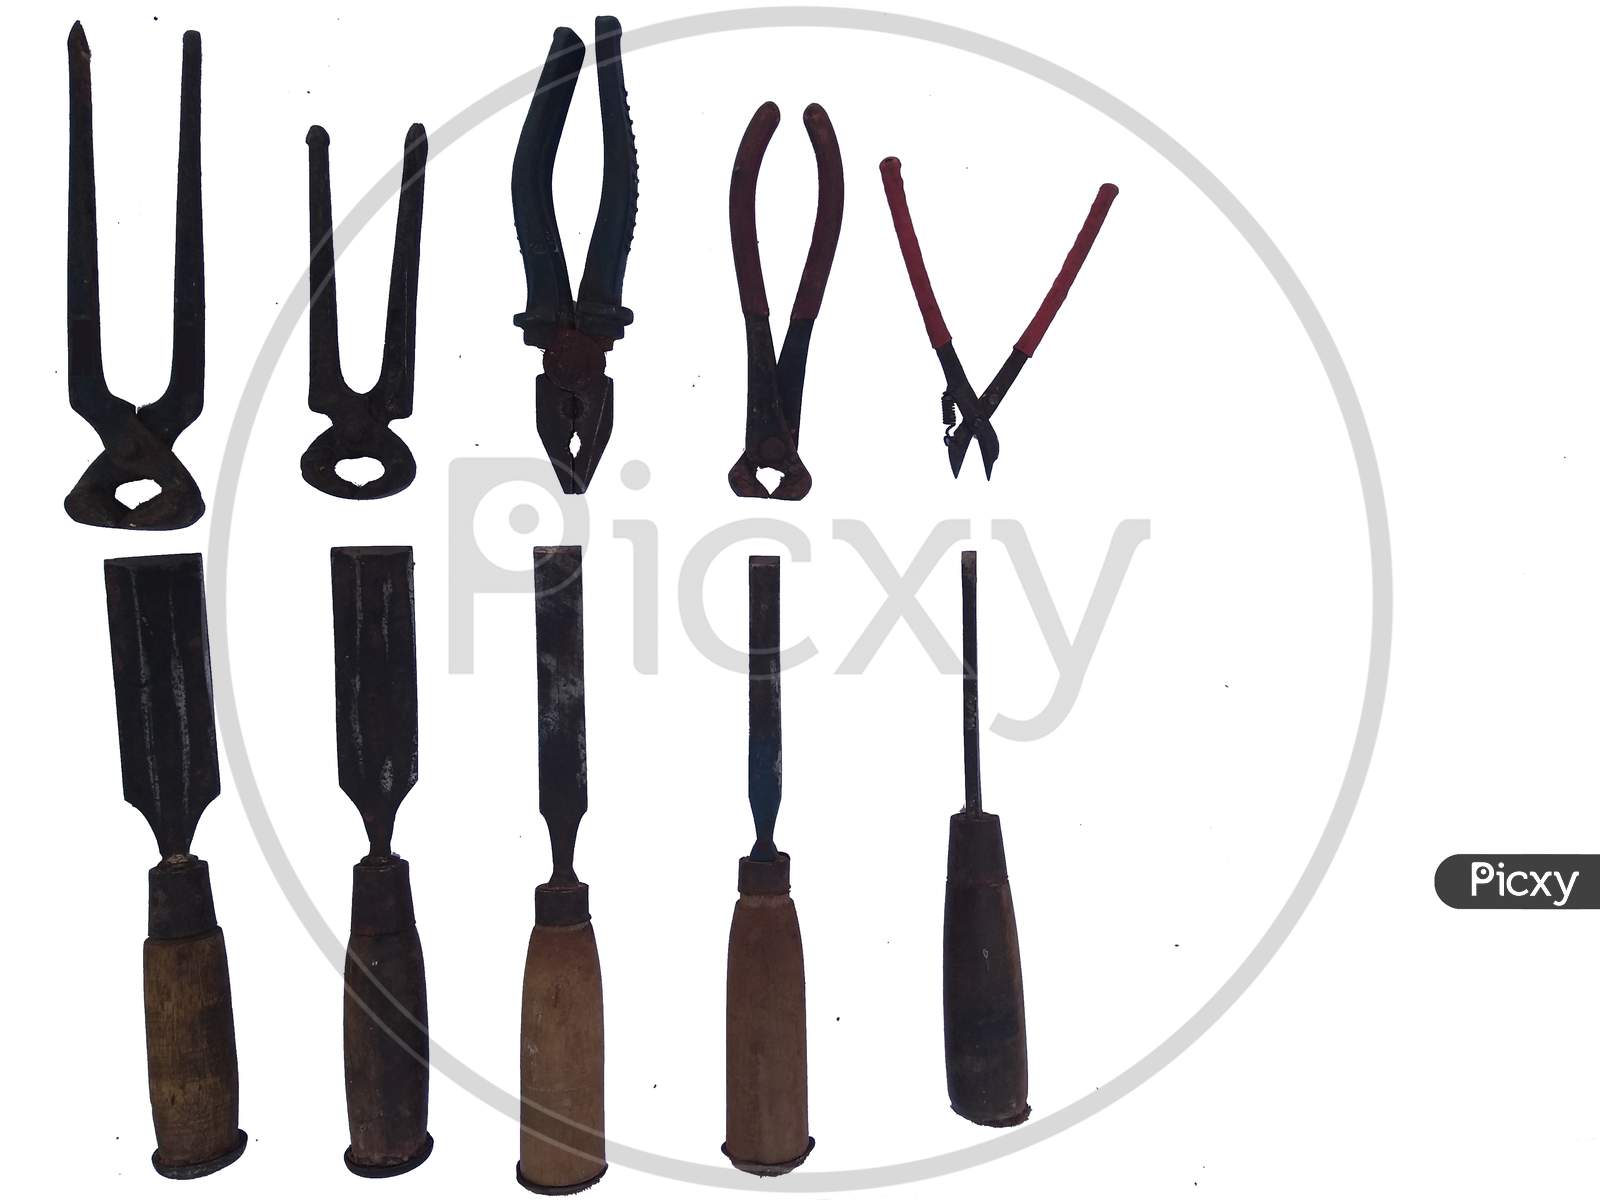 Different Types Of Carpenter Tools Like Chisel And Pliers Isolated On White Background.